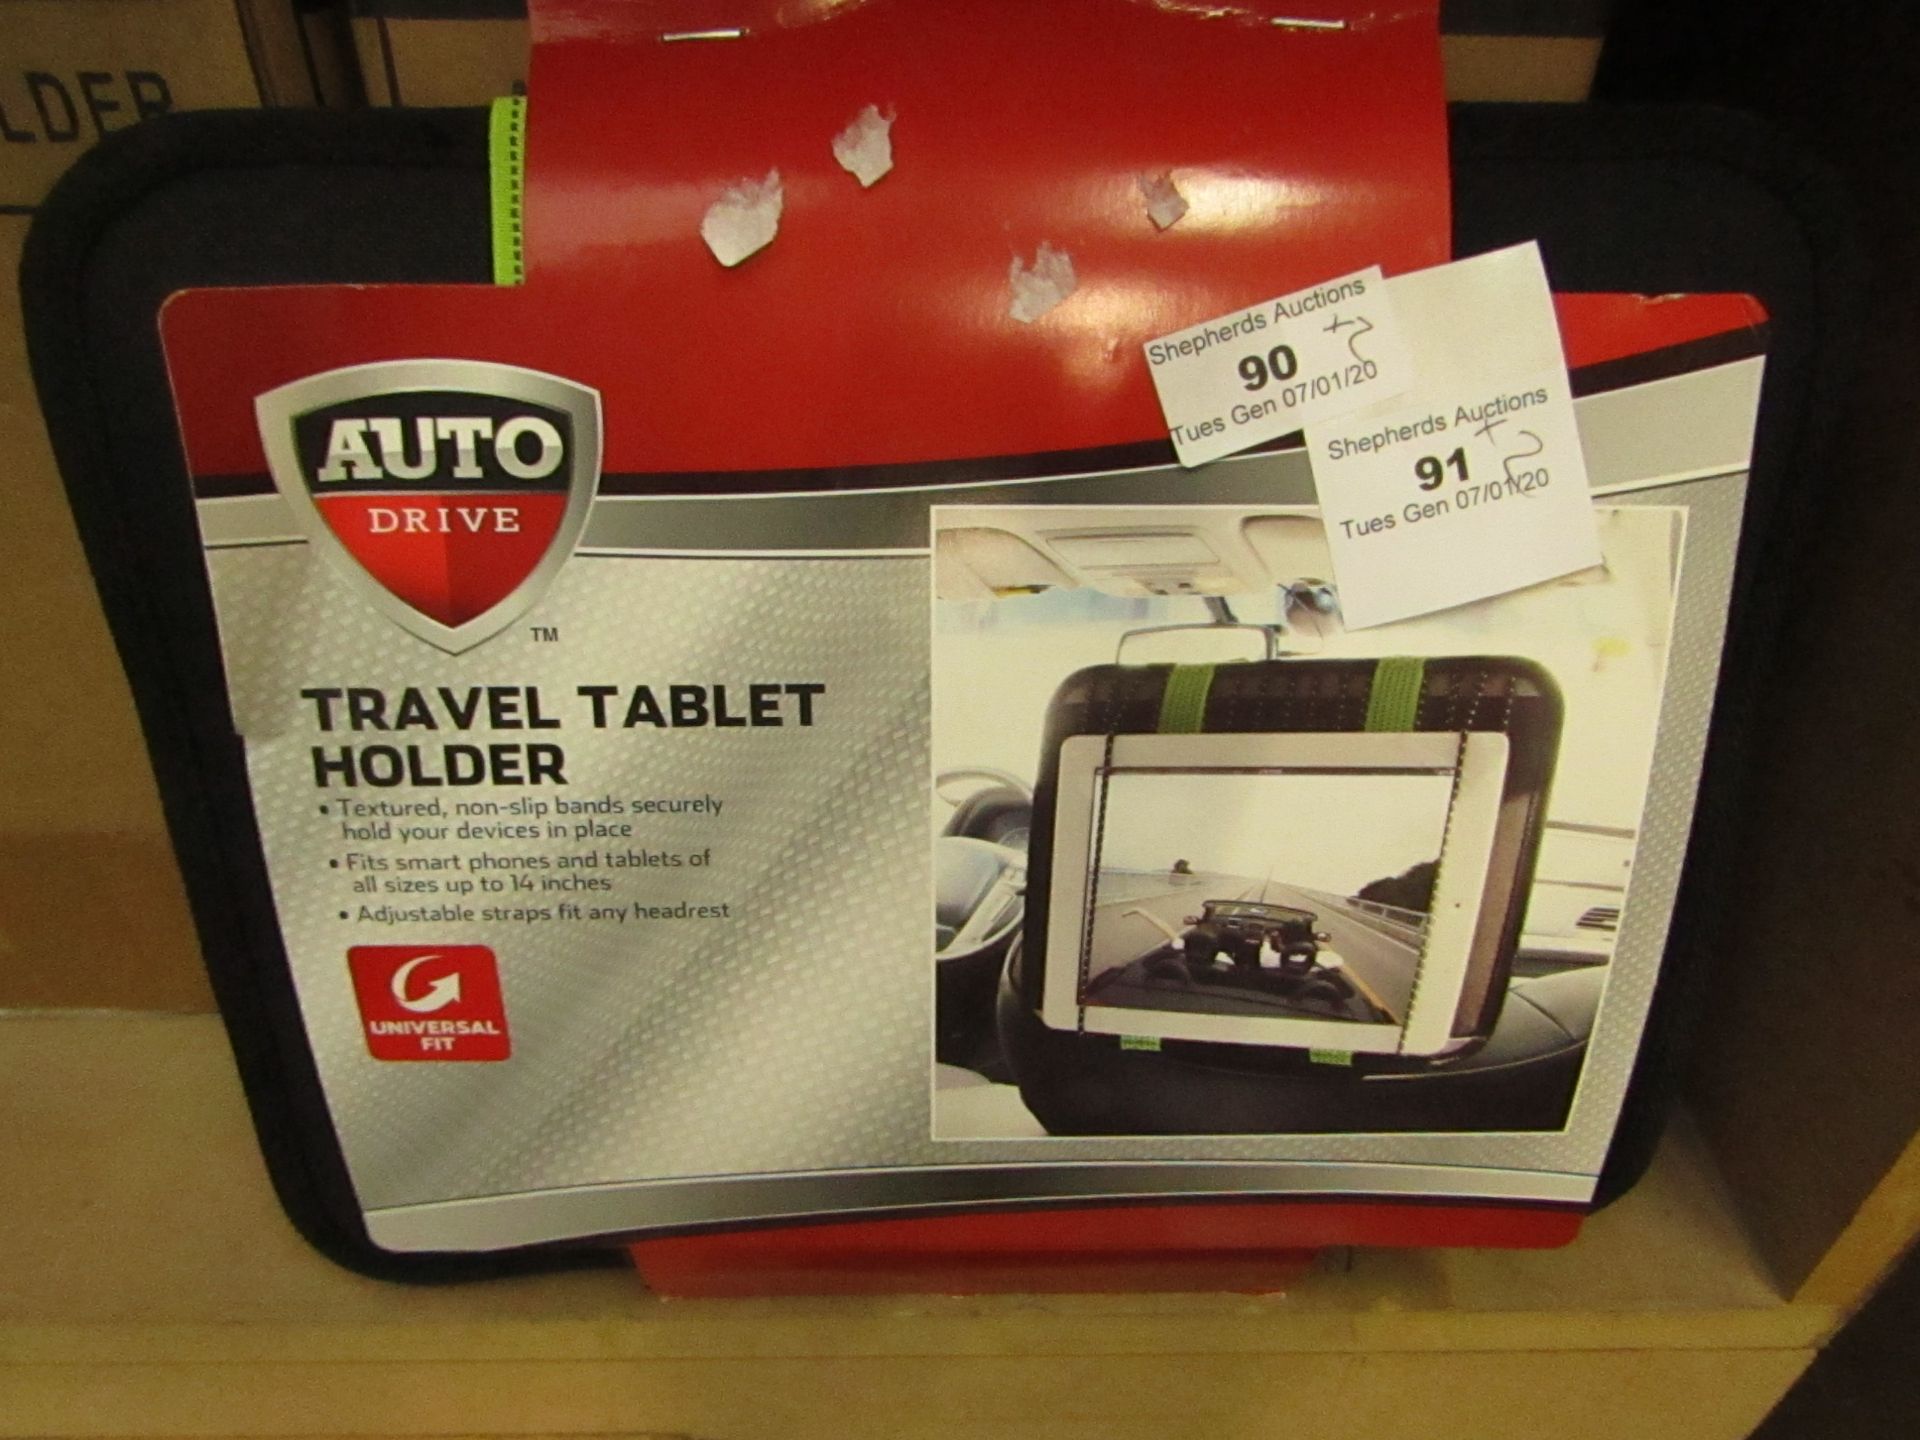 2x Auto Drive tablet holders, new and packaged.